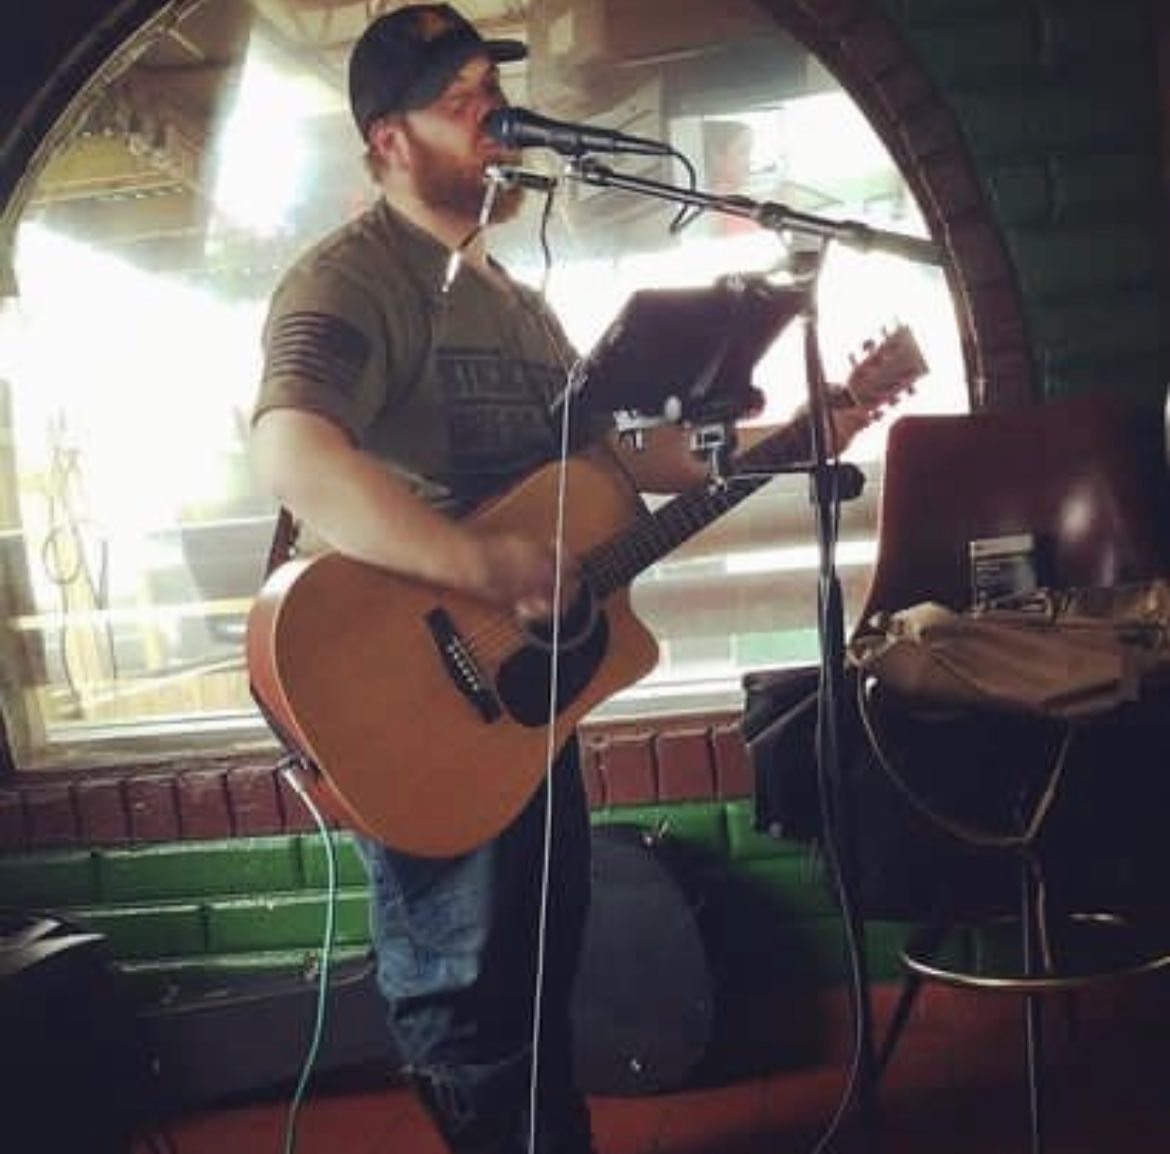 TONIGHT! Andrew Katter on the mic from 8-11 PM with live music🍻✨ Gonna be a great night! #GREENLINEBREWERY